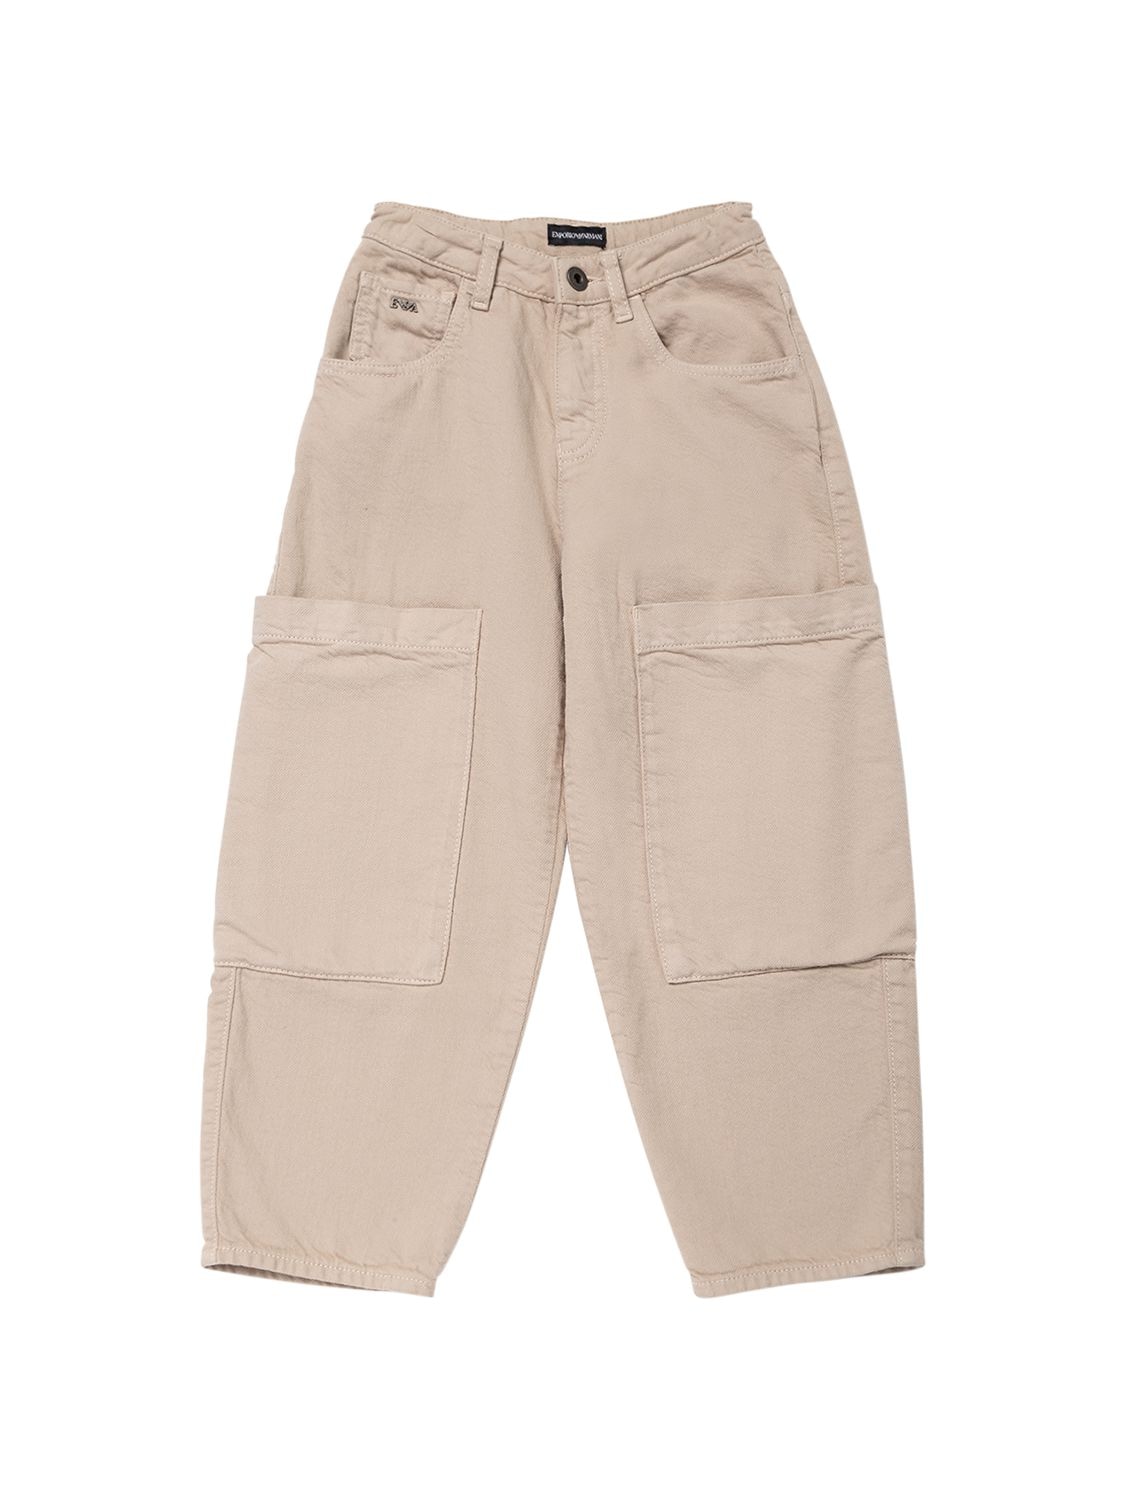 Image of Cotton Cargo Pants